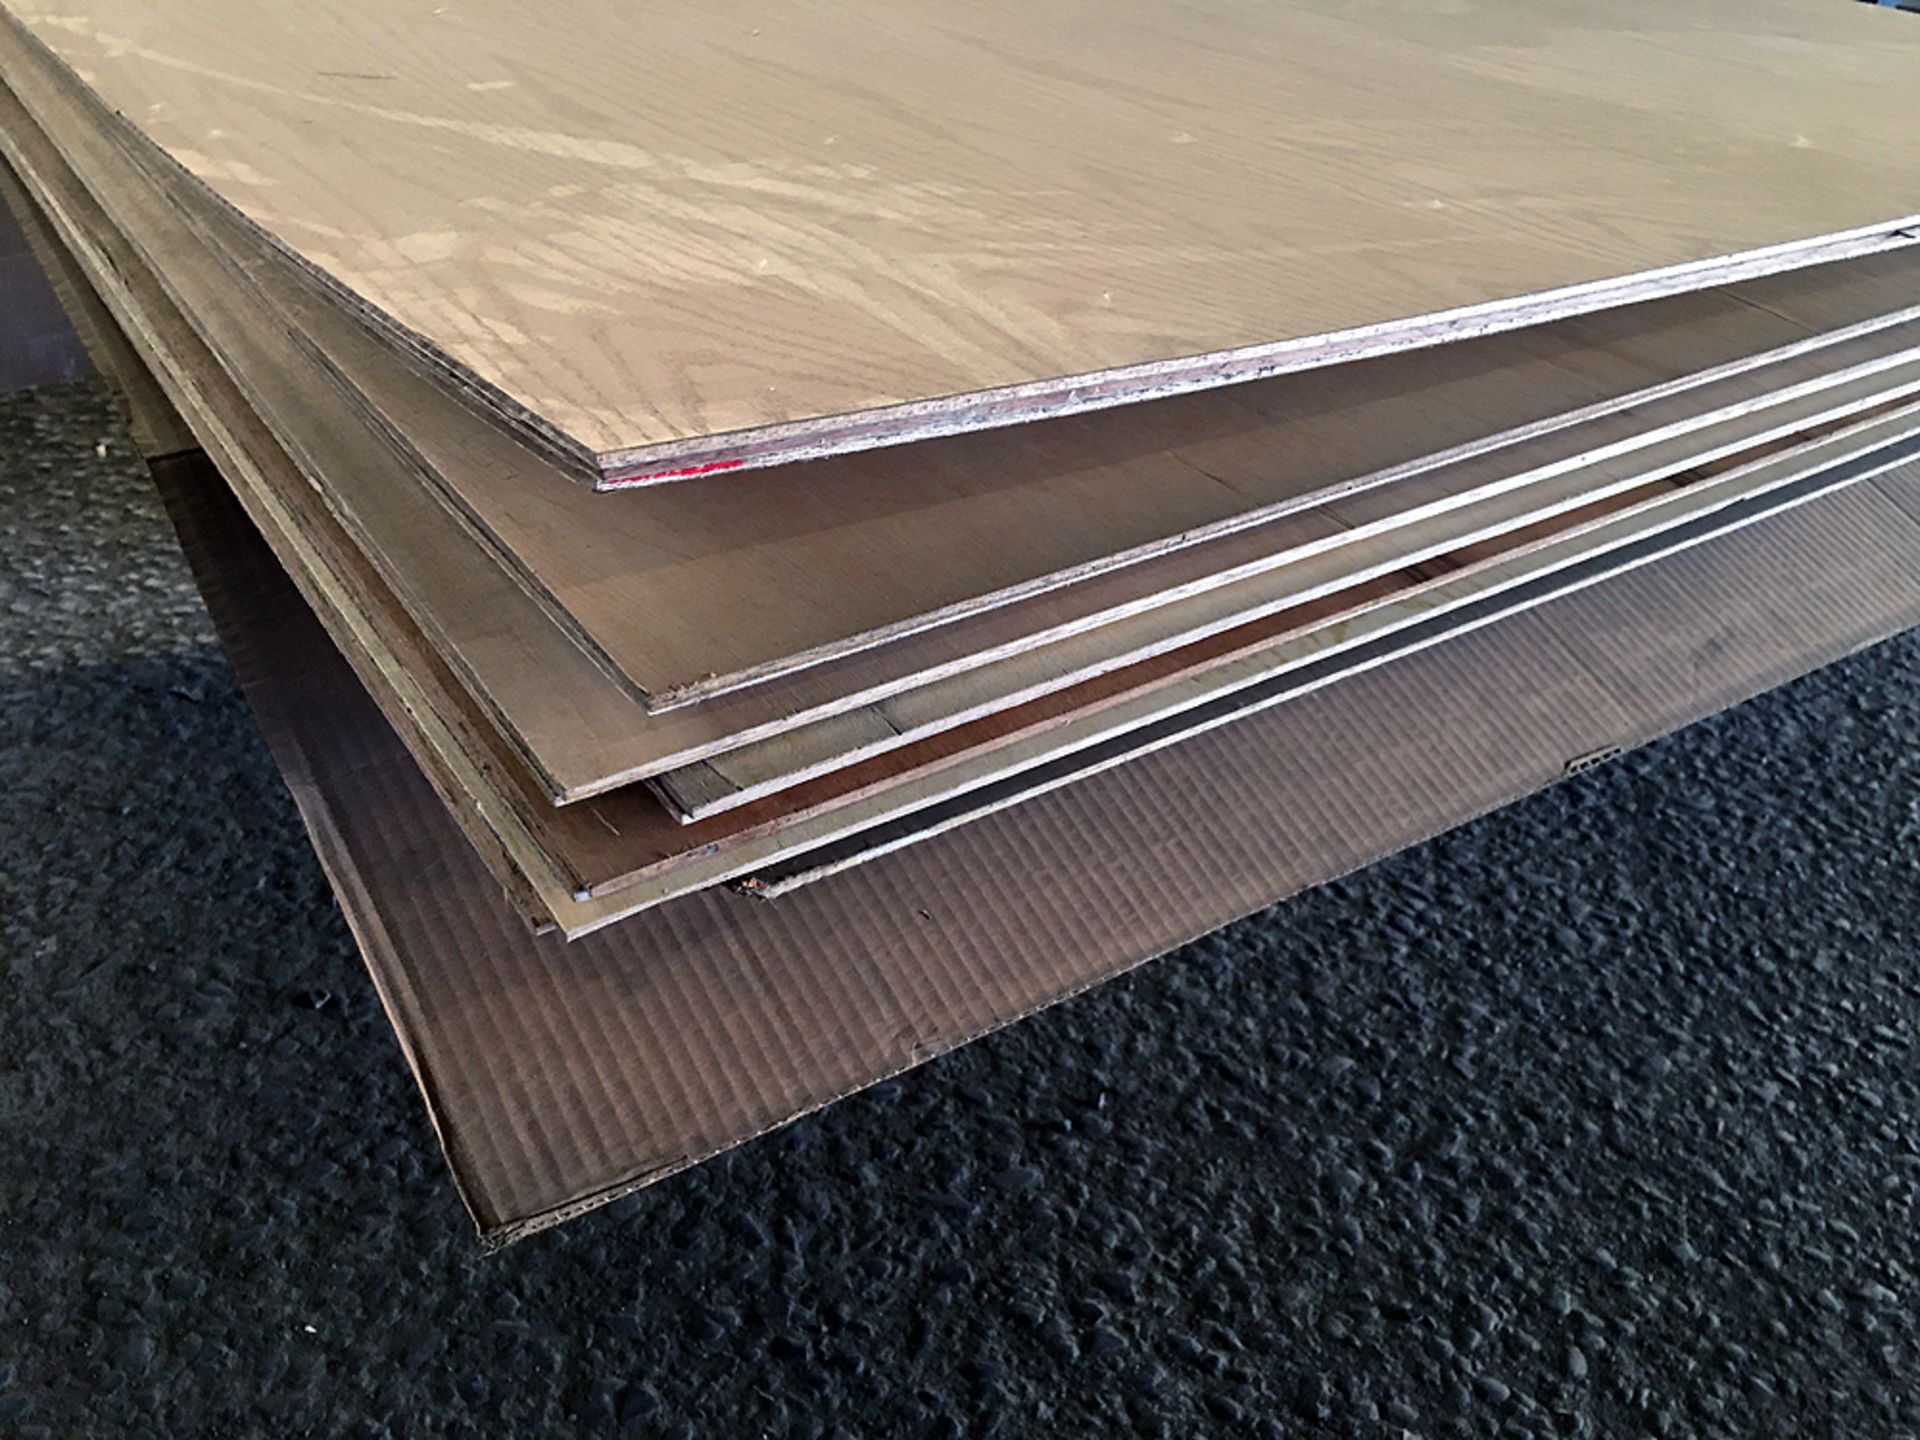 4'x8'x1/4" Thick Oak Plywood Boards - Image 4 of 7